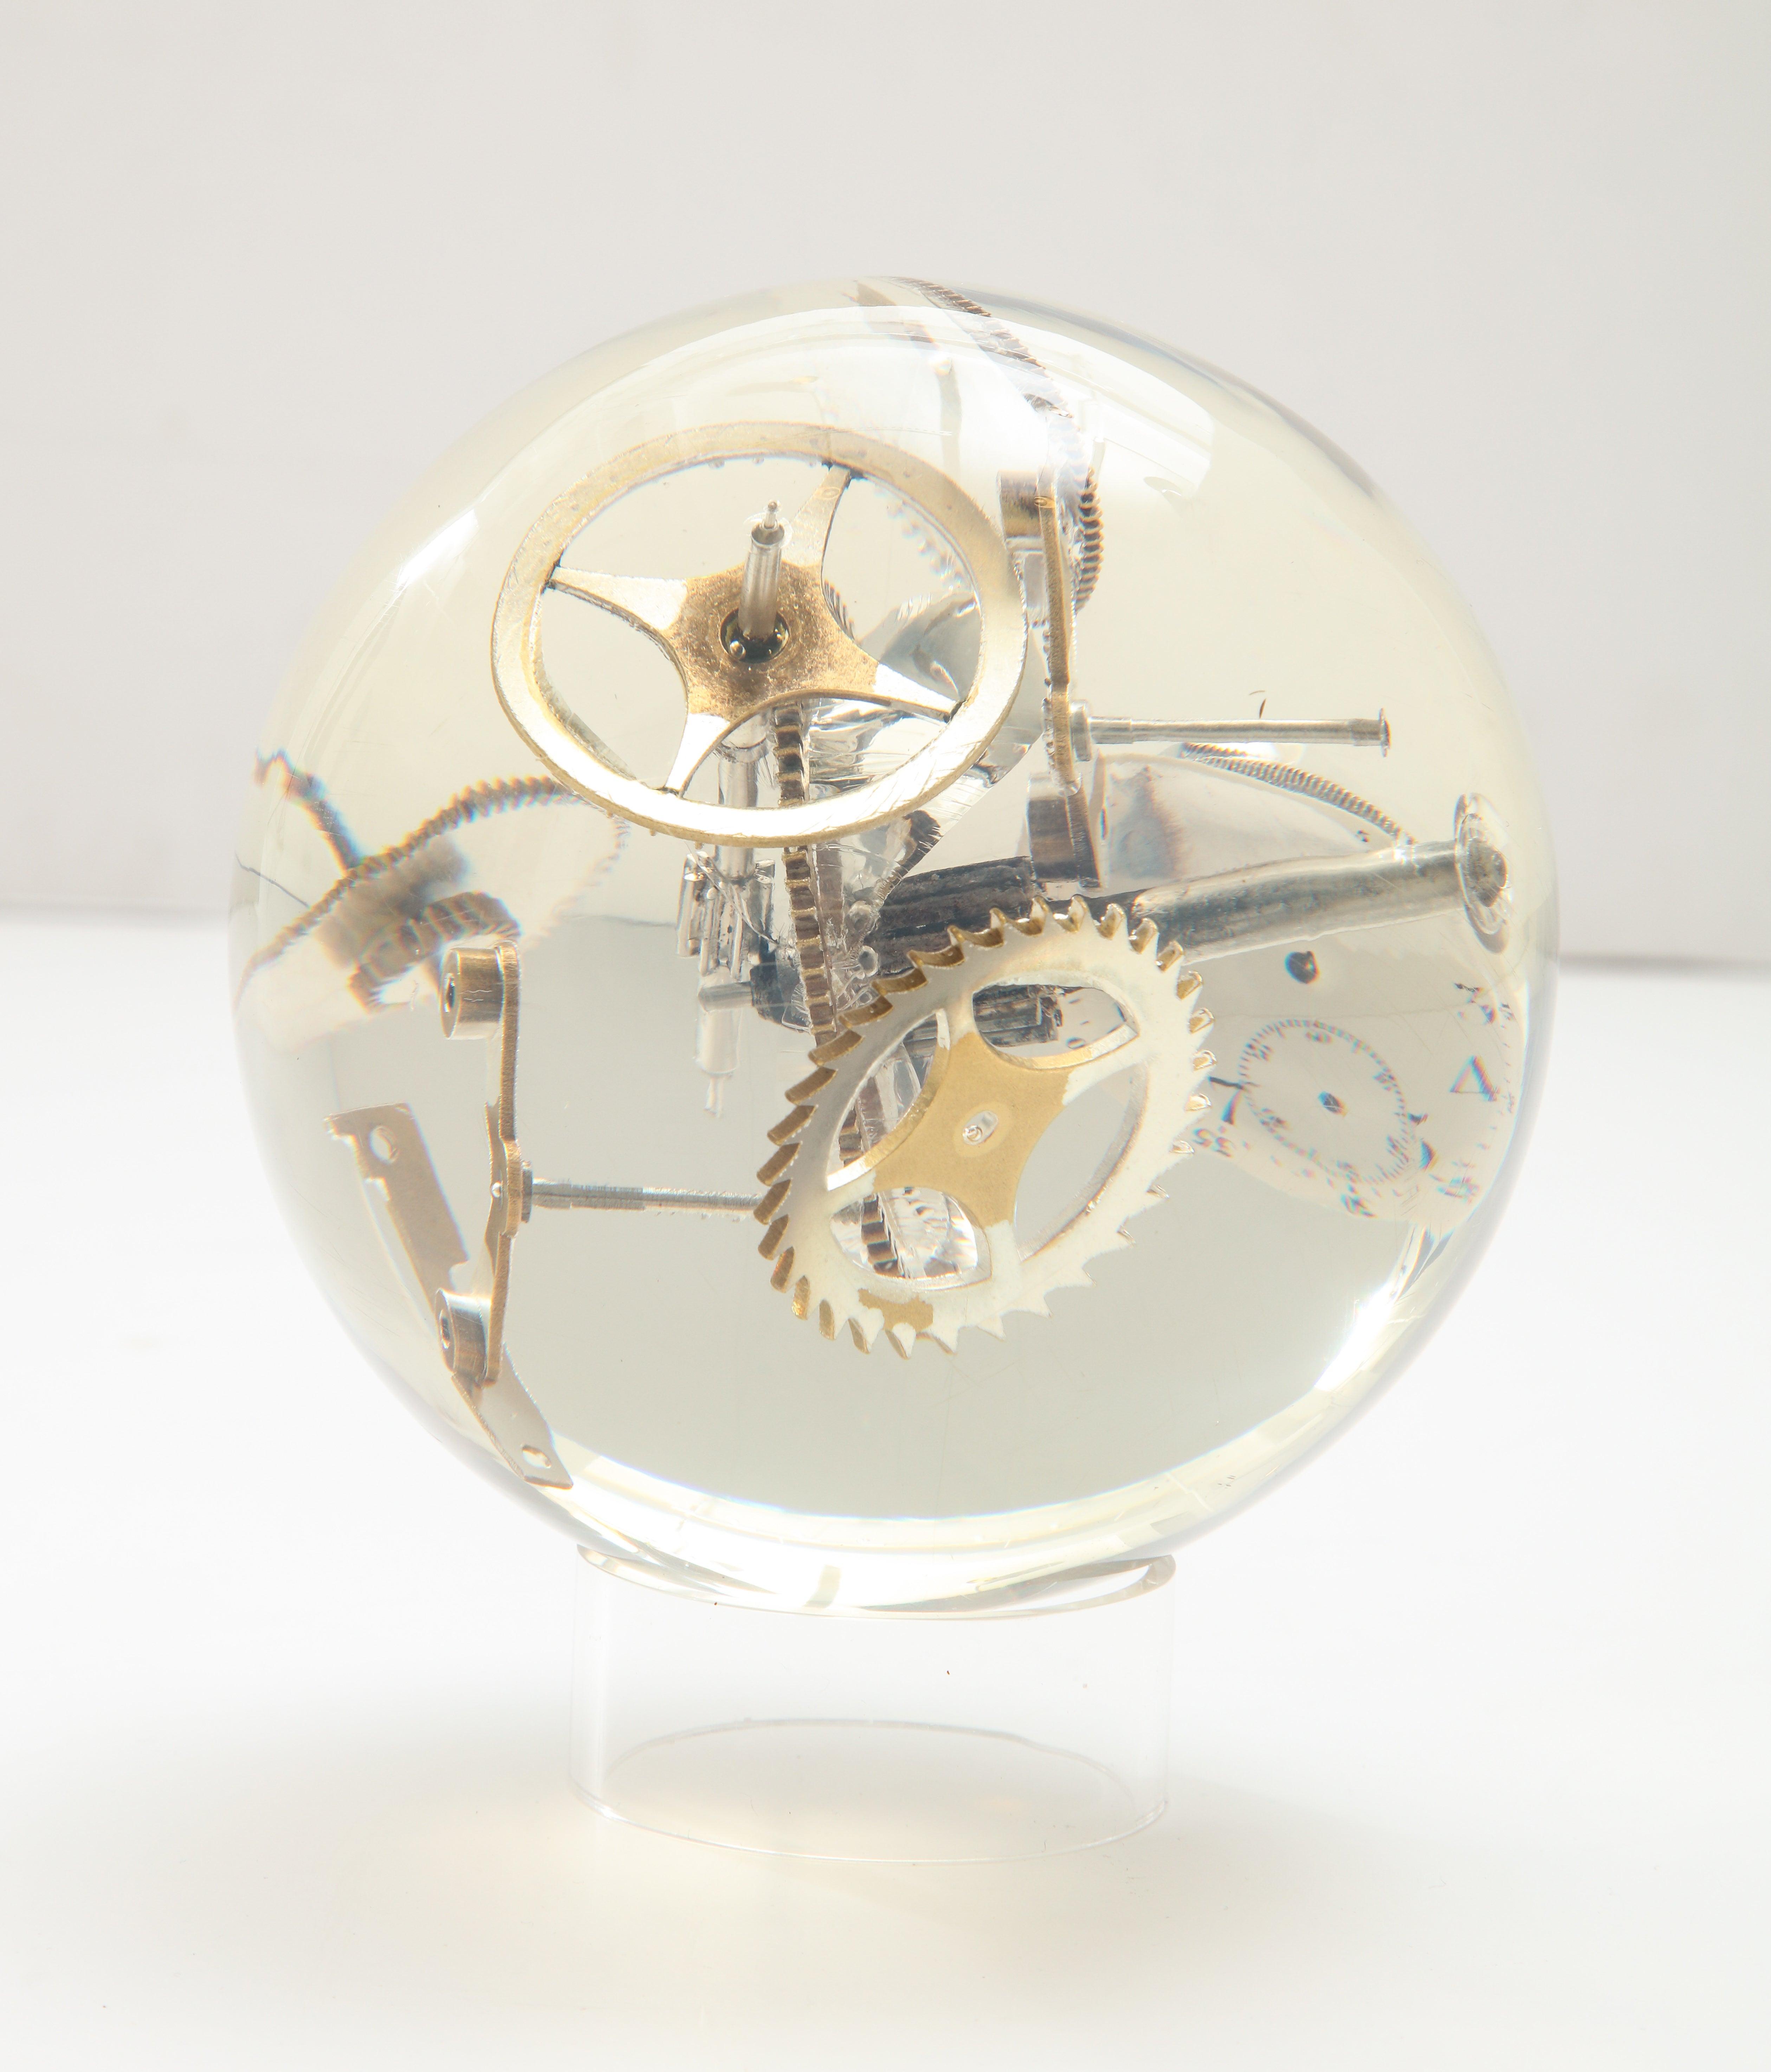 Resin sphere with exploded watch parts. Small scale chunky cast acrylic table sculpture with incased watch elements, including gears and a clock face. Sold with circular clear acrylic 2 inch stand.